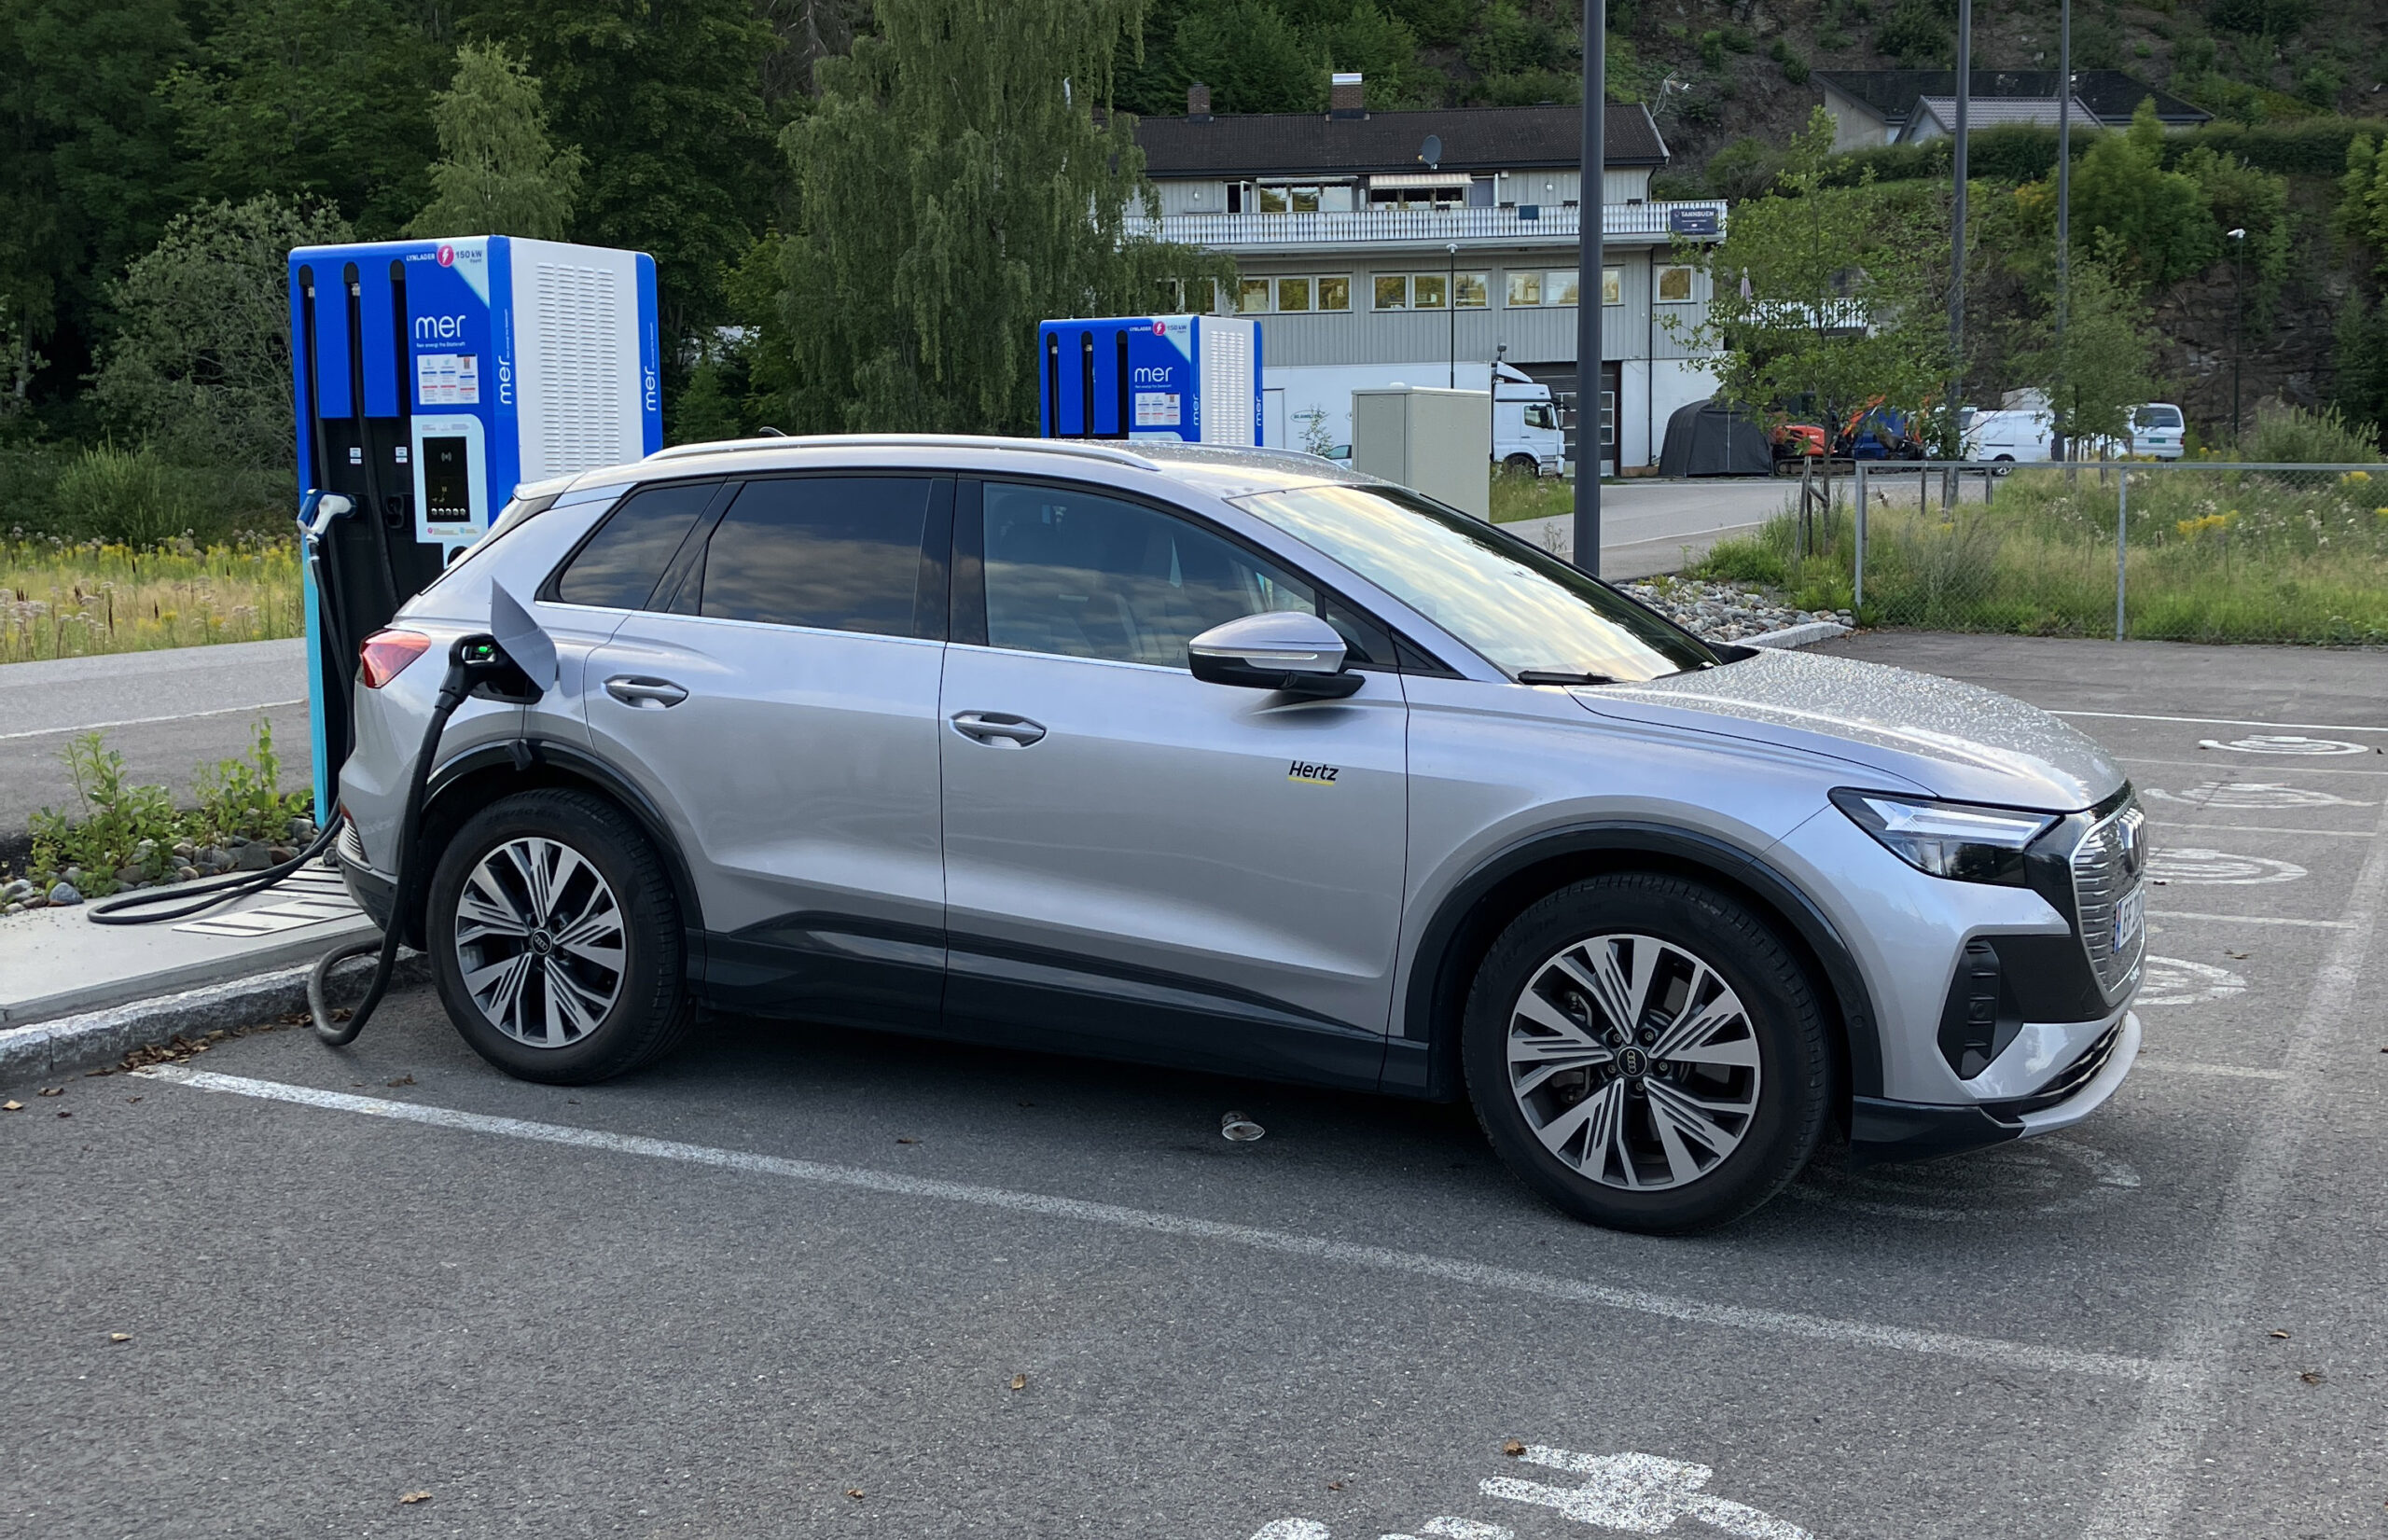 Renting an electric car in Norway